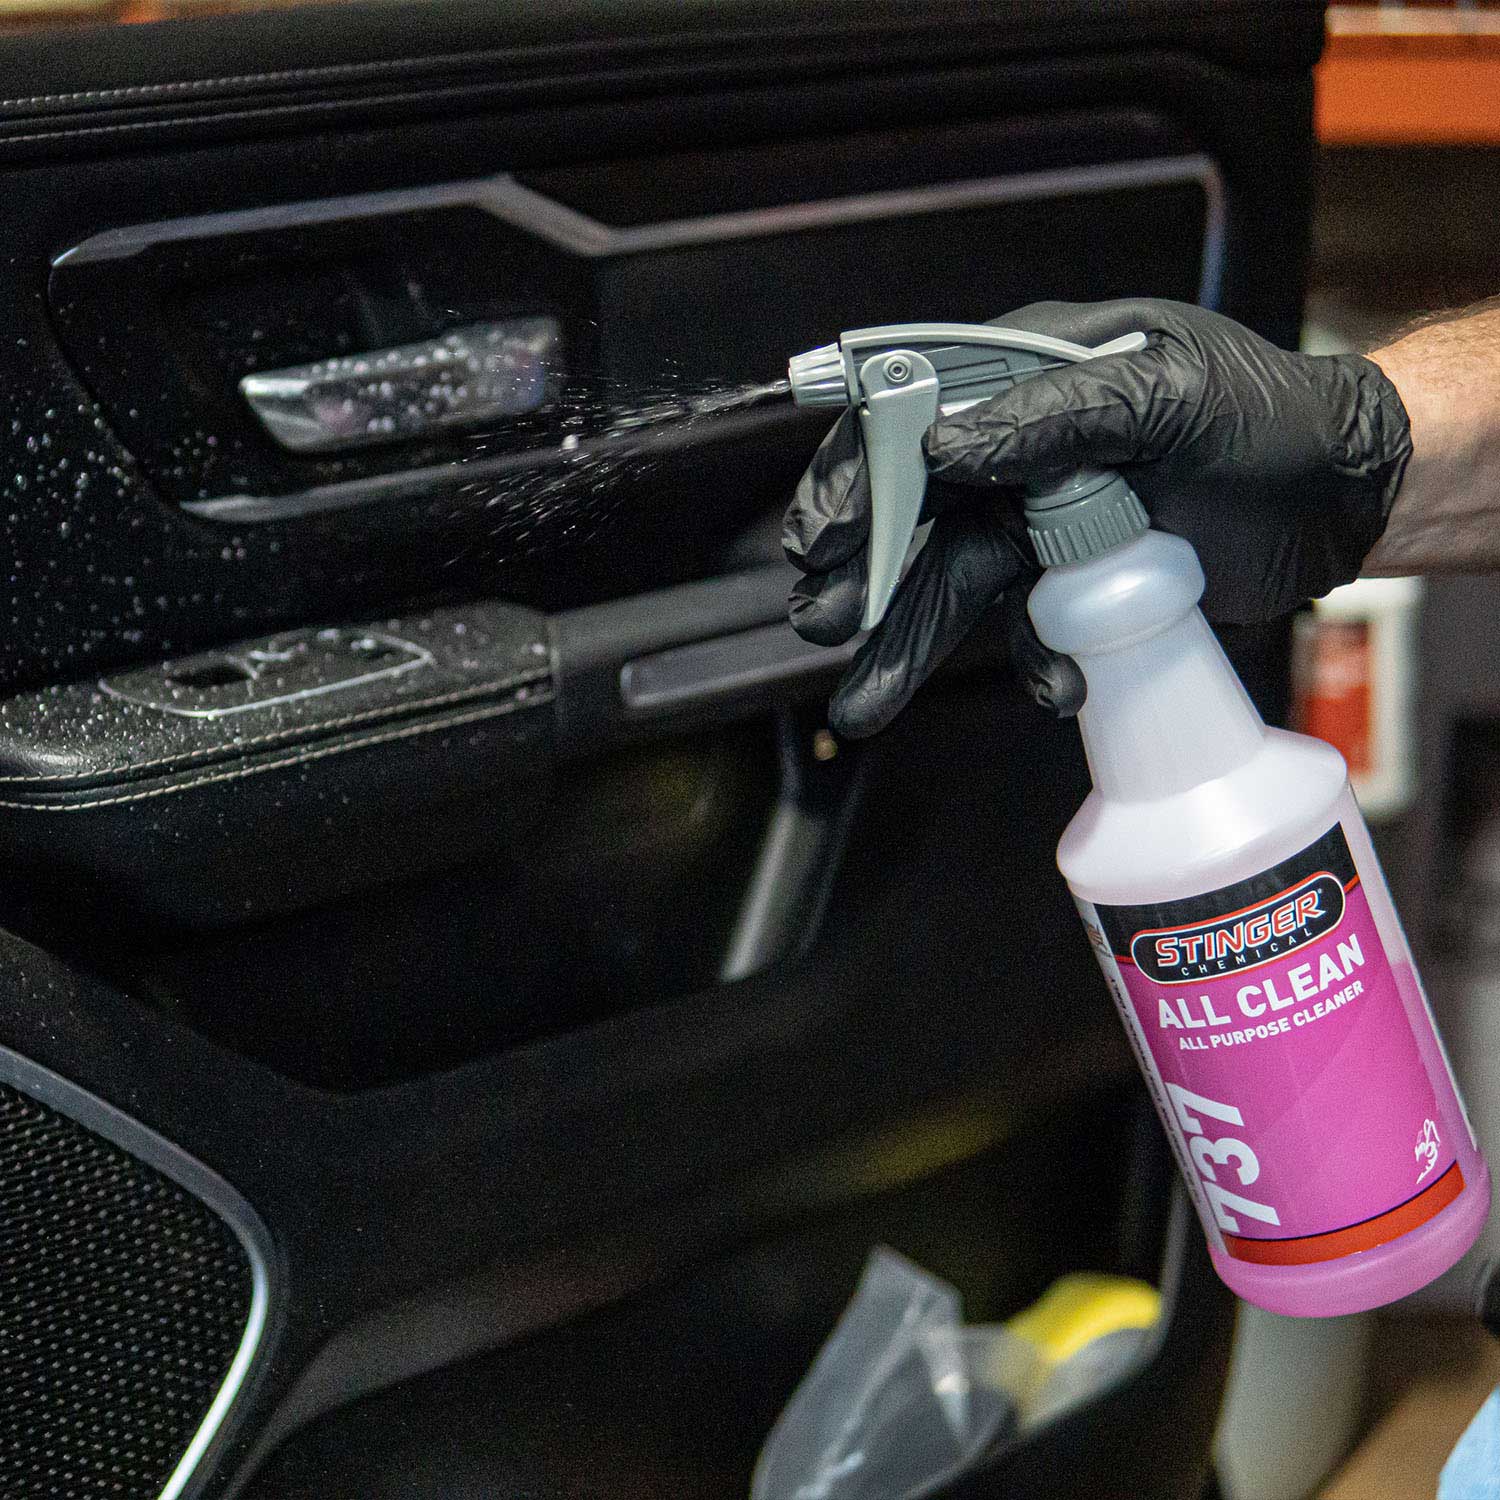 all-clean-cleaner-spraying-inside-truck